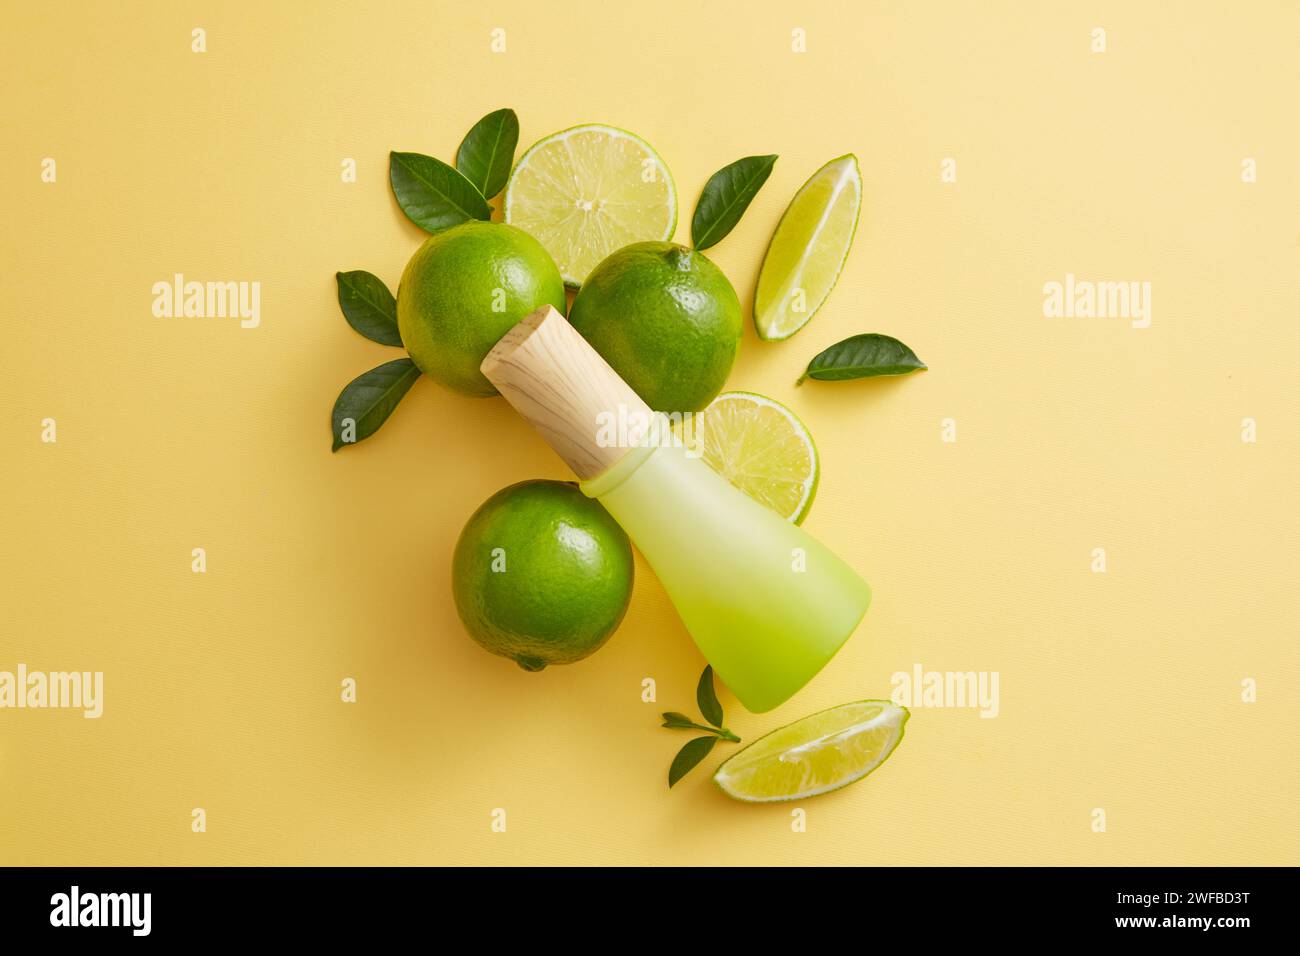 Empty label jar with wooden cap is arranged with Lime and green leaves over light background. Lime (Citrus aurantiifolia) is used to slow down the agi Stock Photo